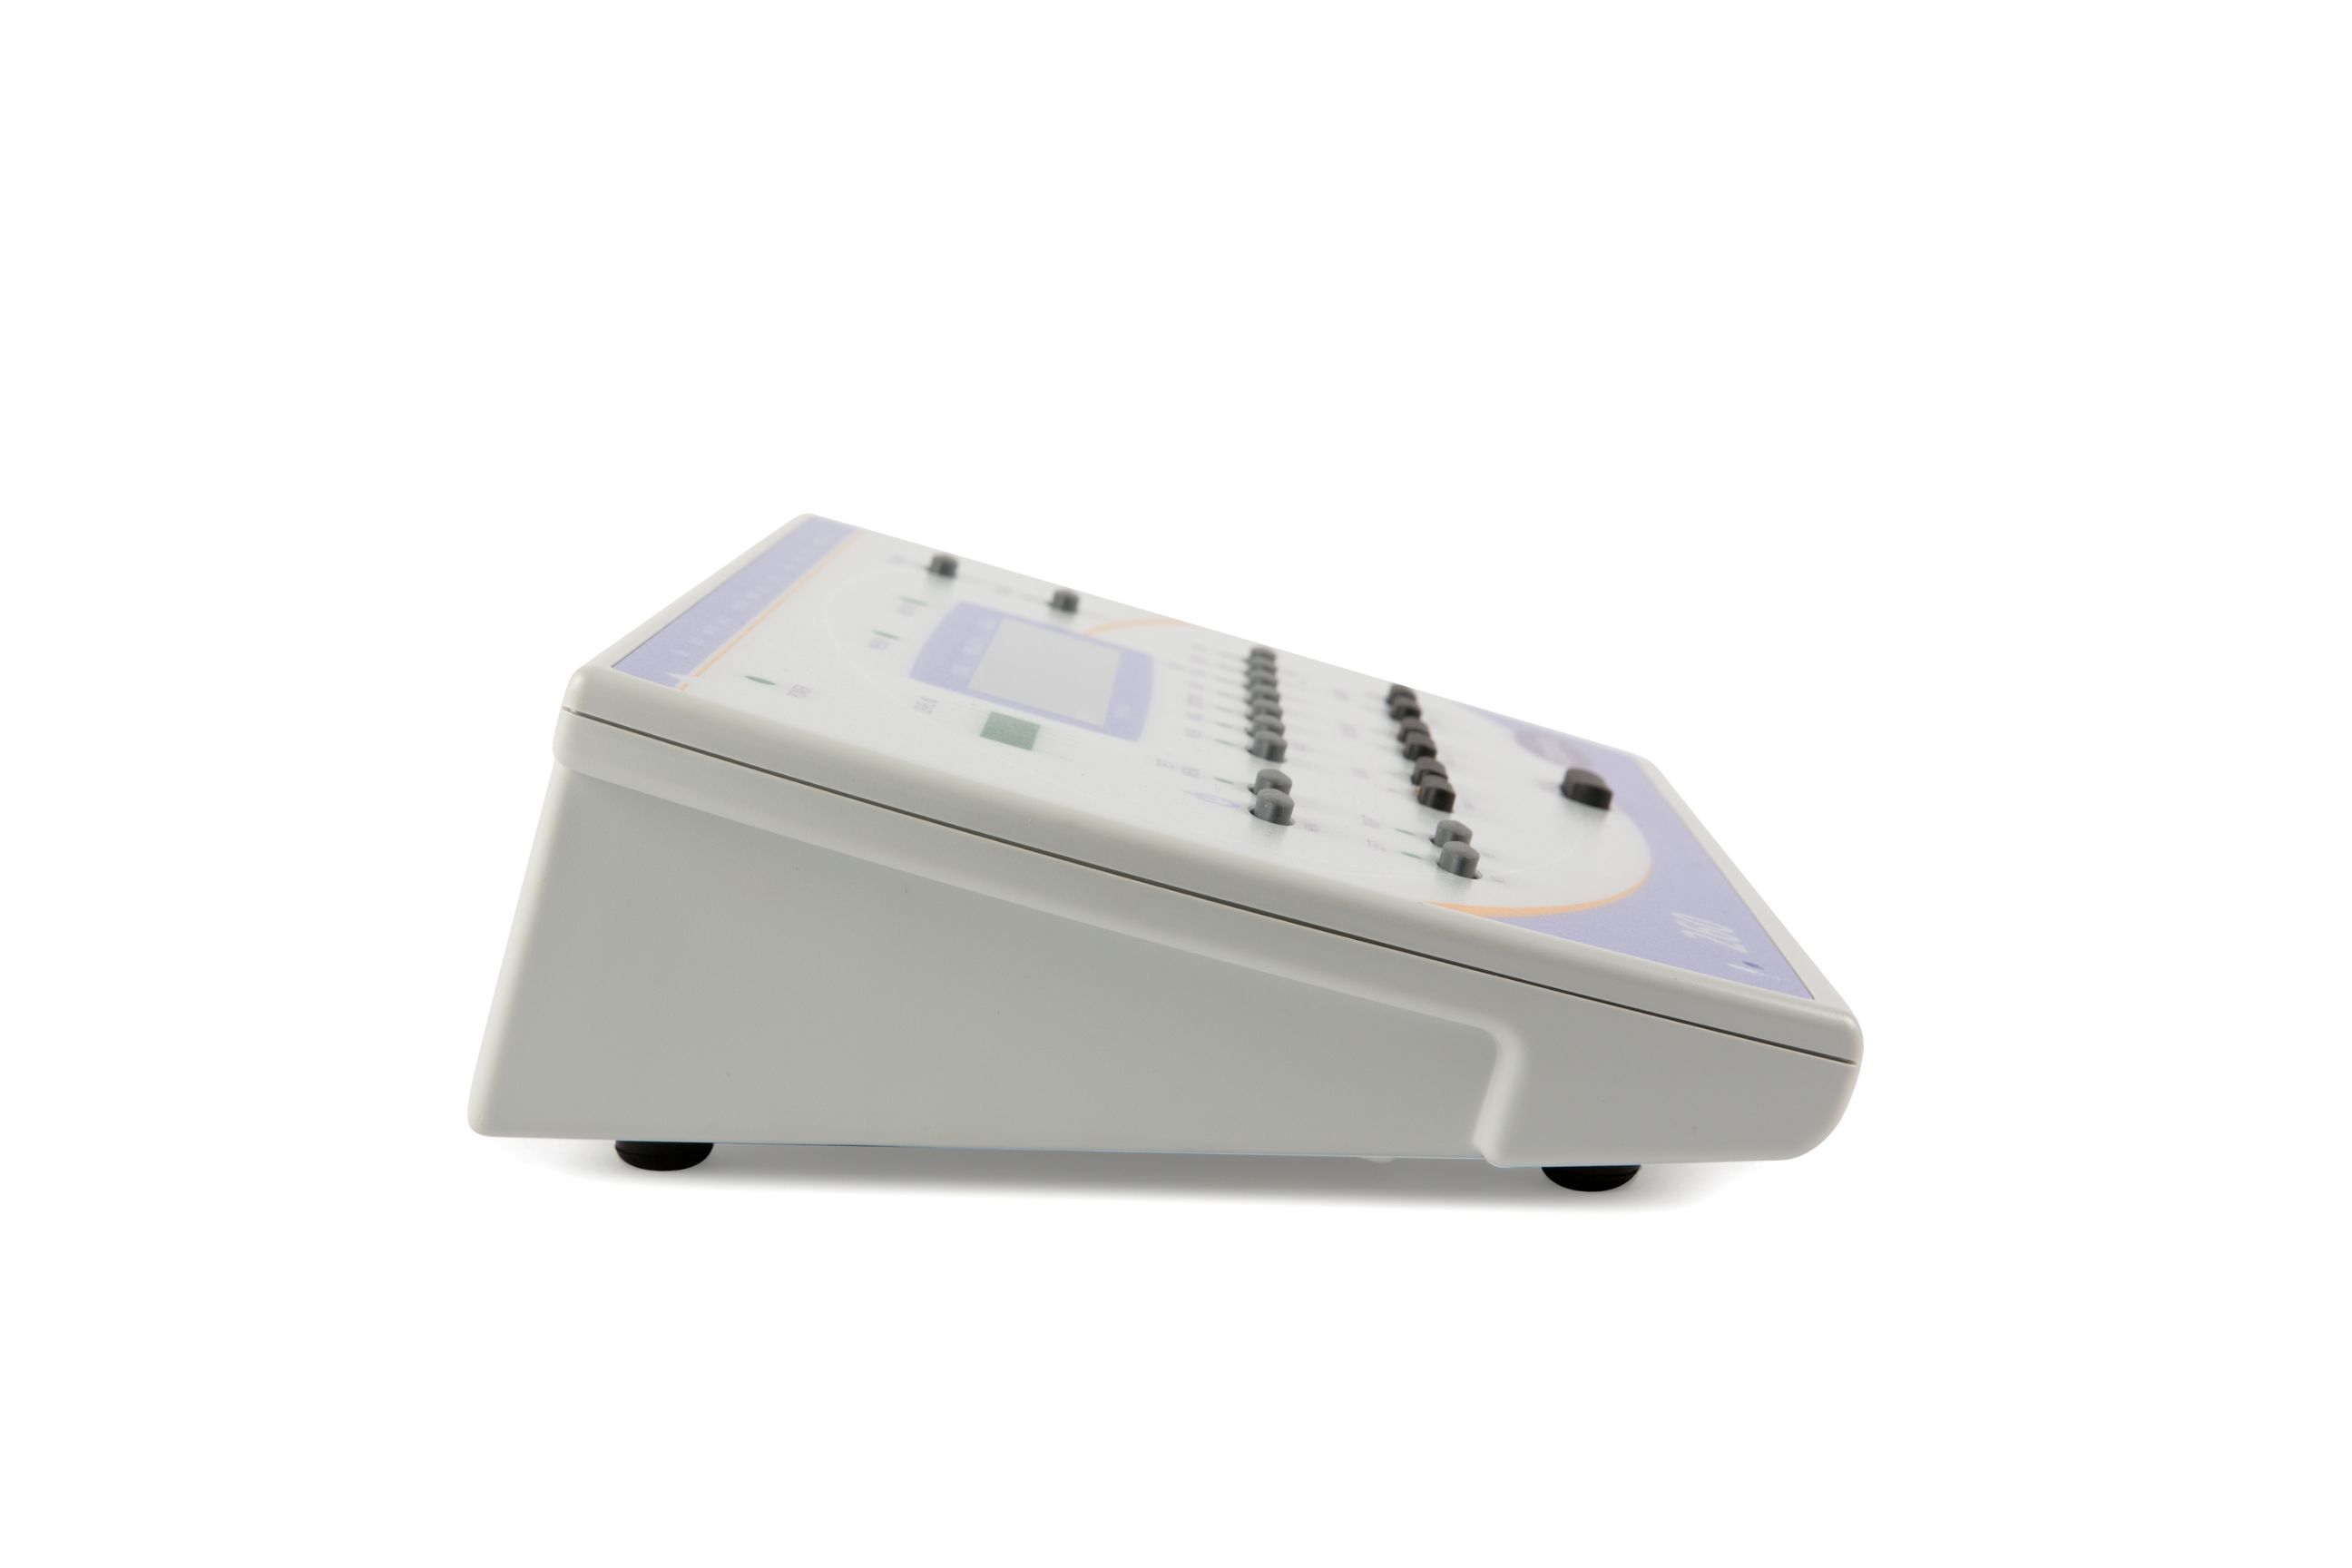 Amplivox 260 Diagnostic Audiometer with Audiocups